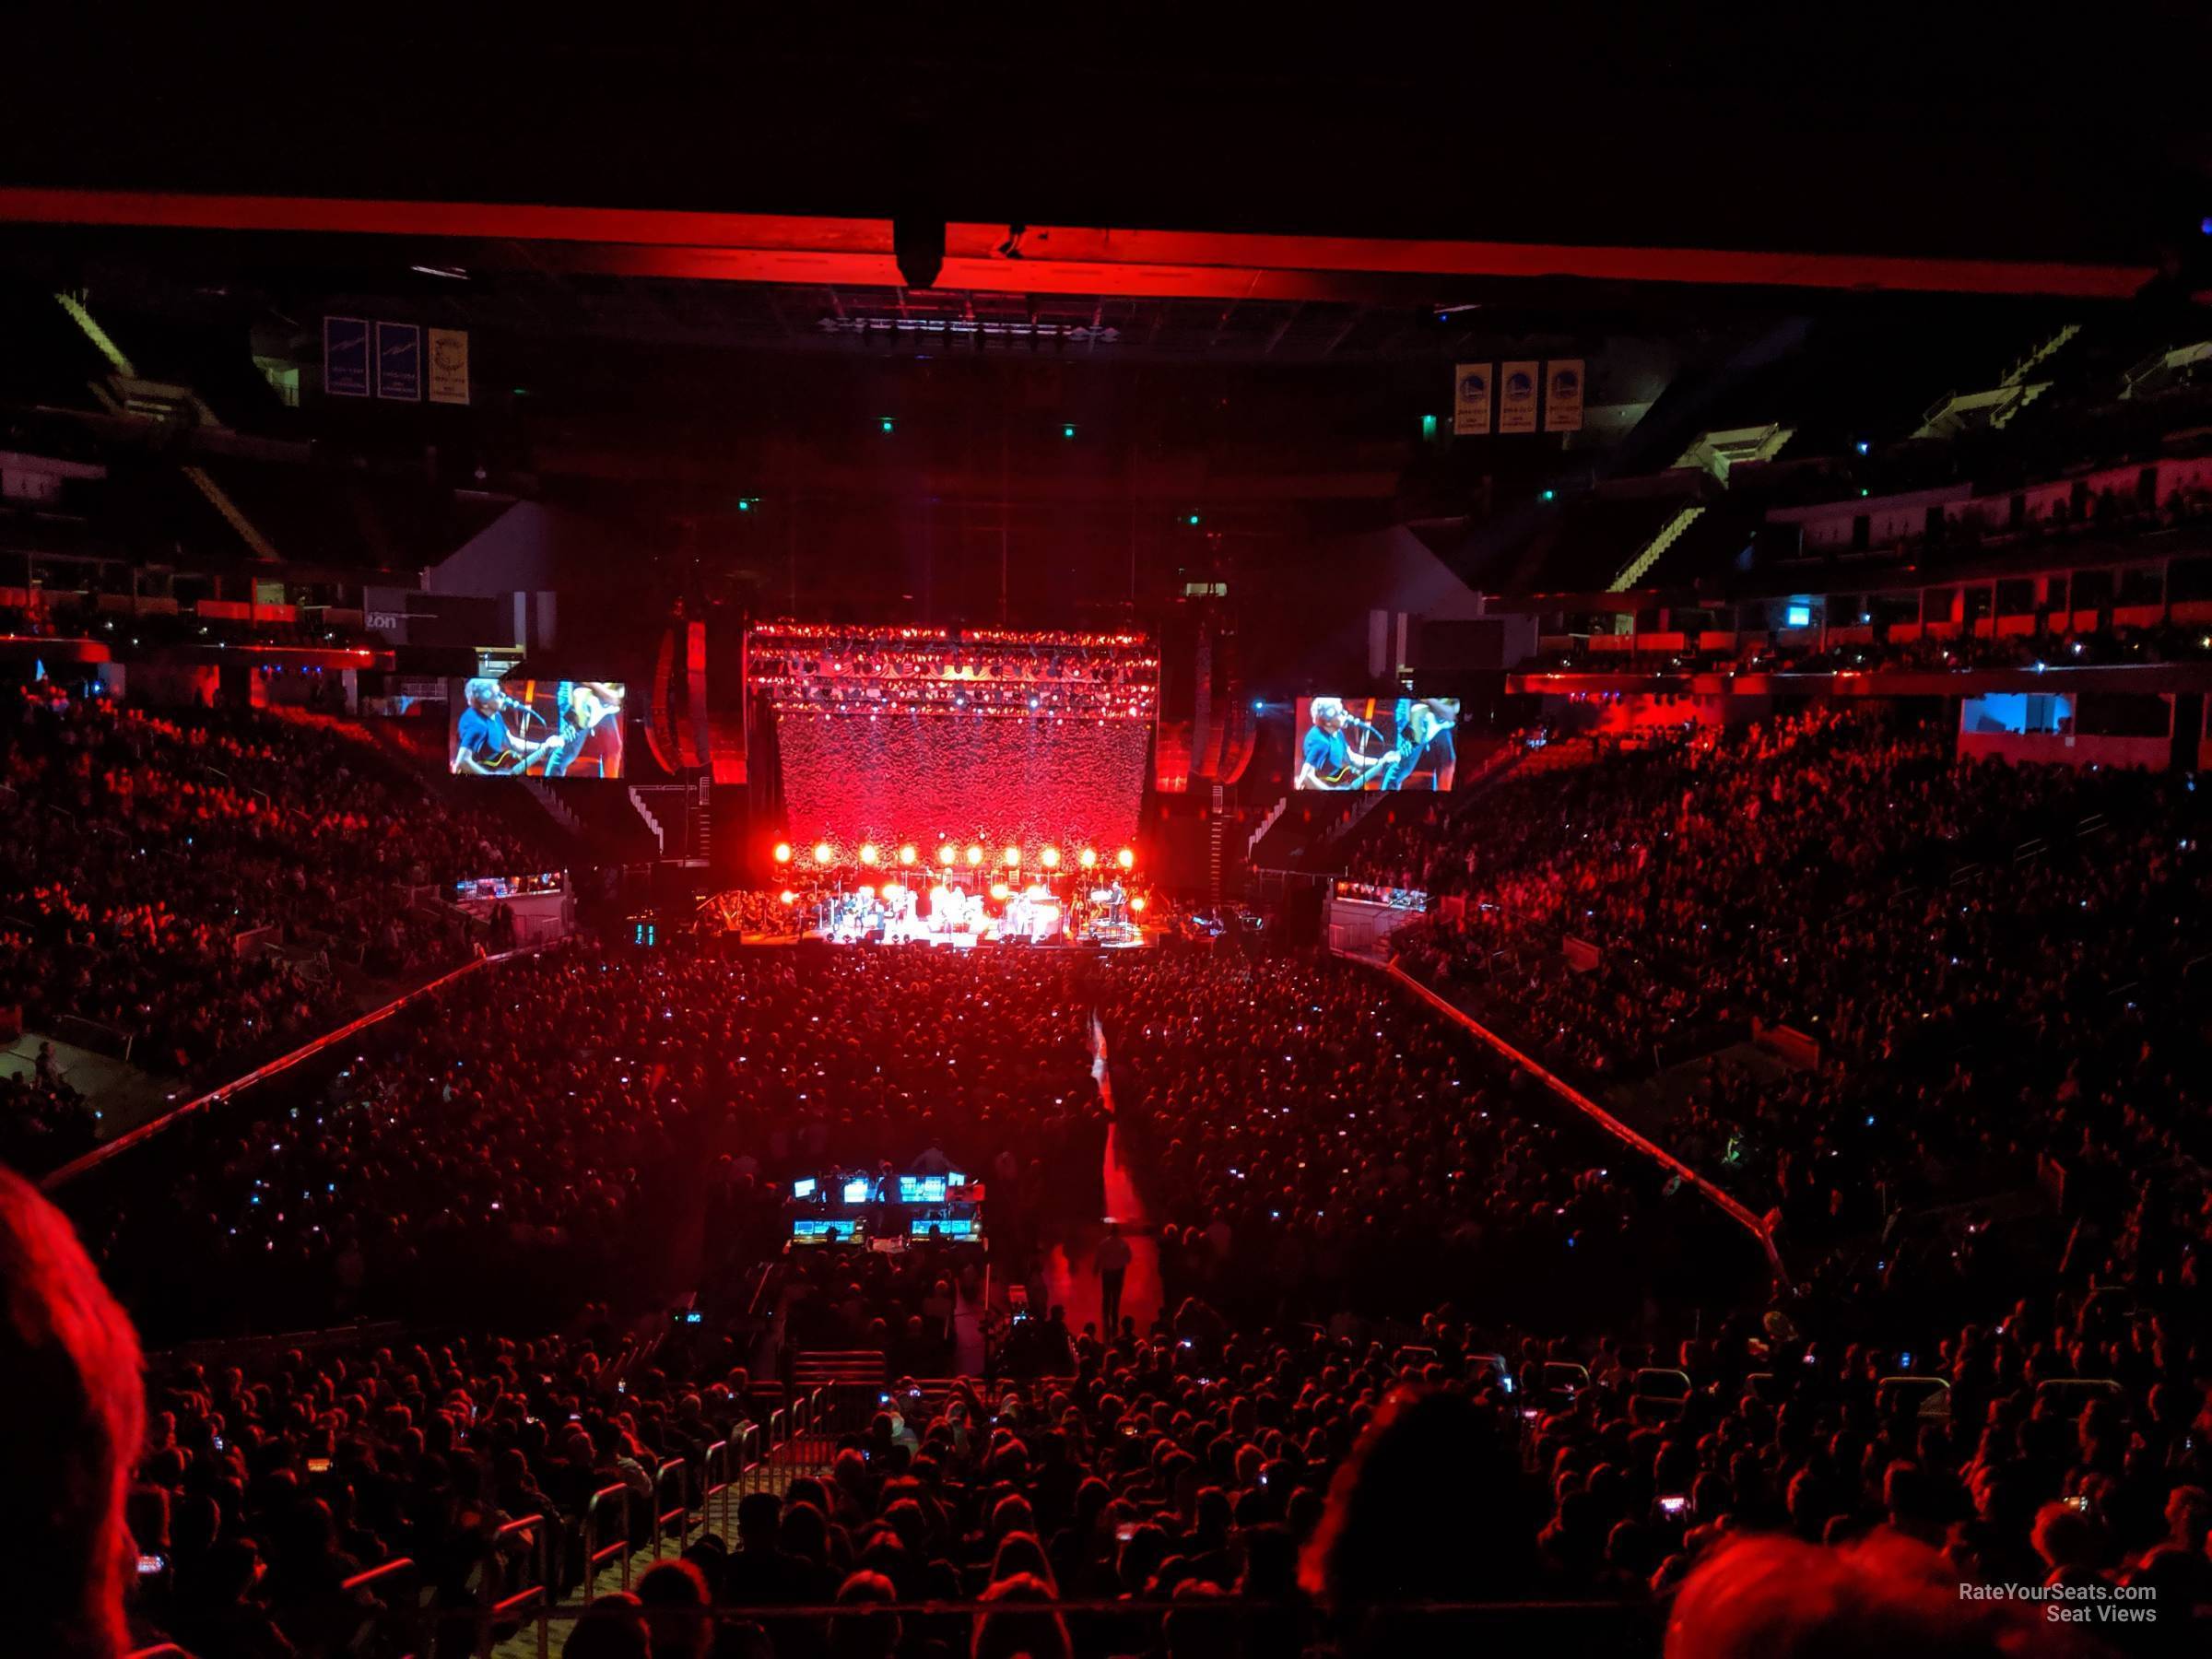 head-on concert view at Chase Center